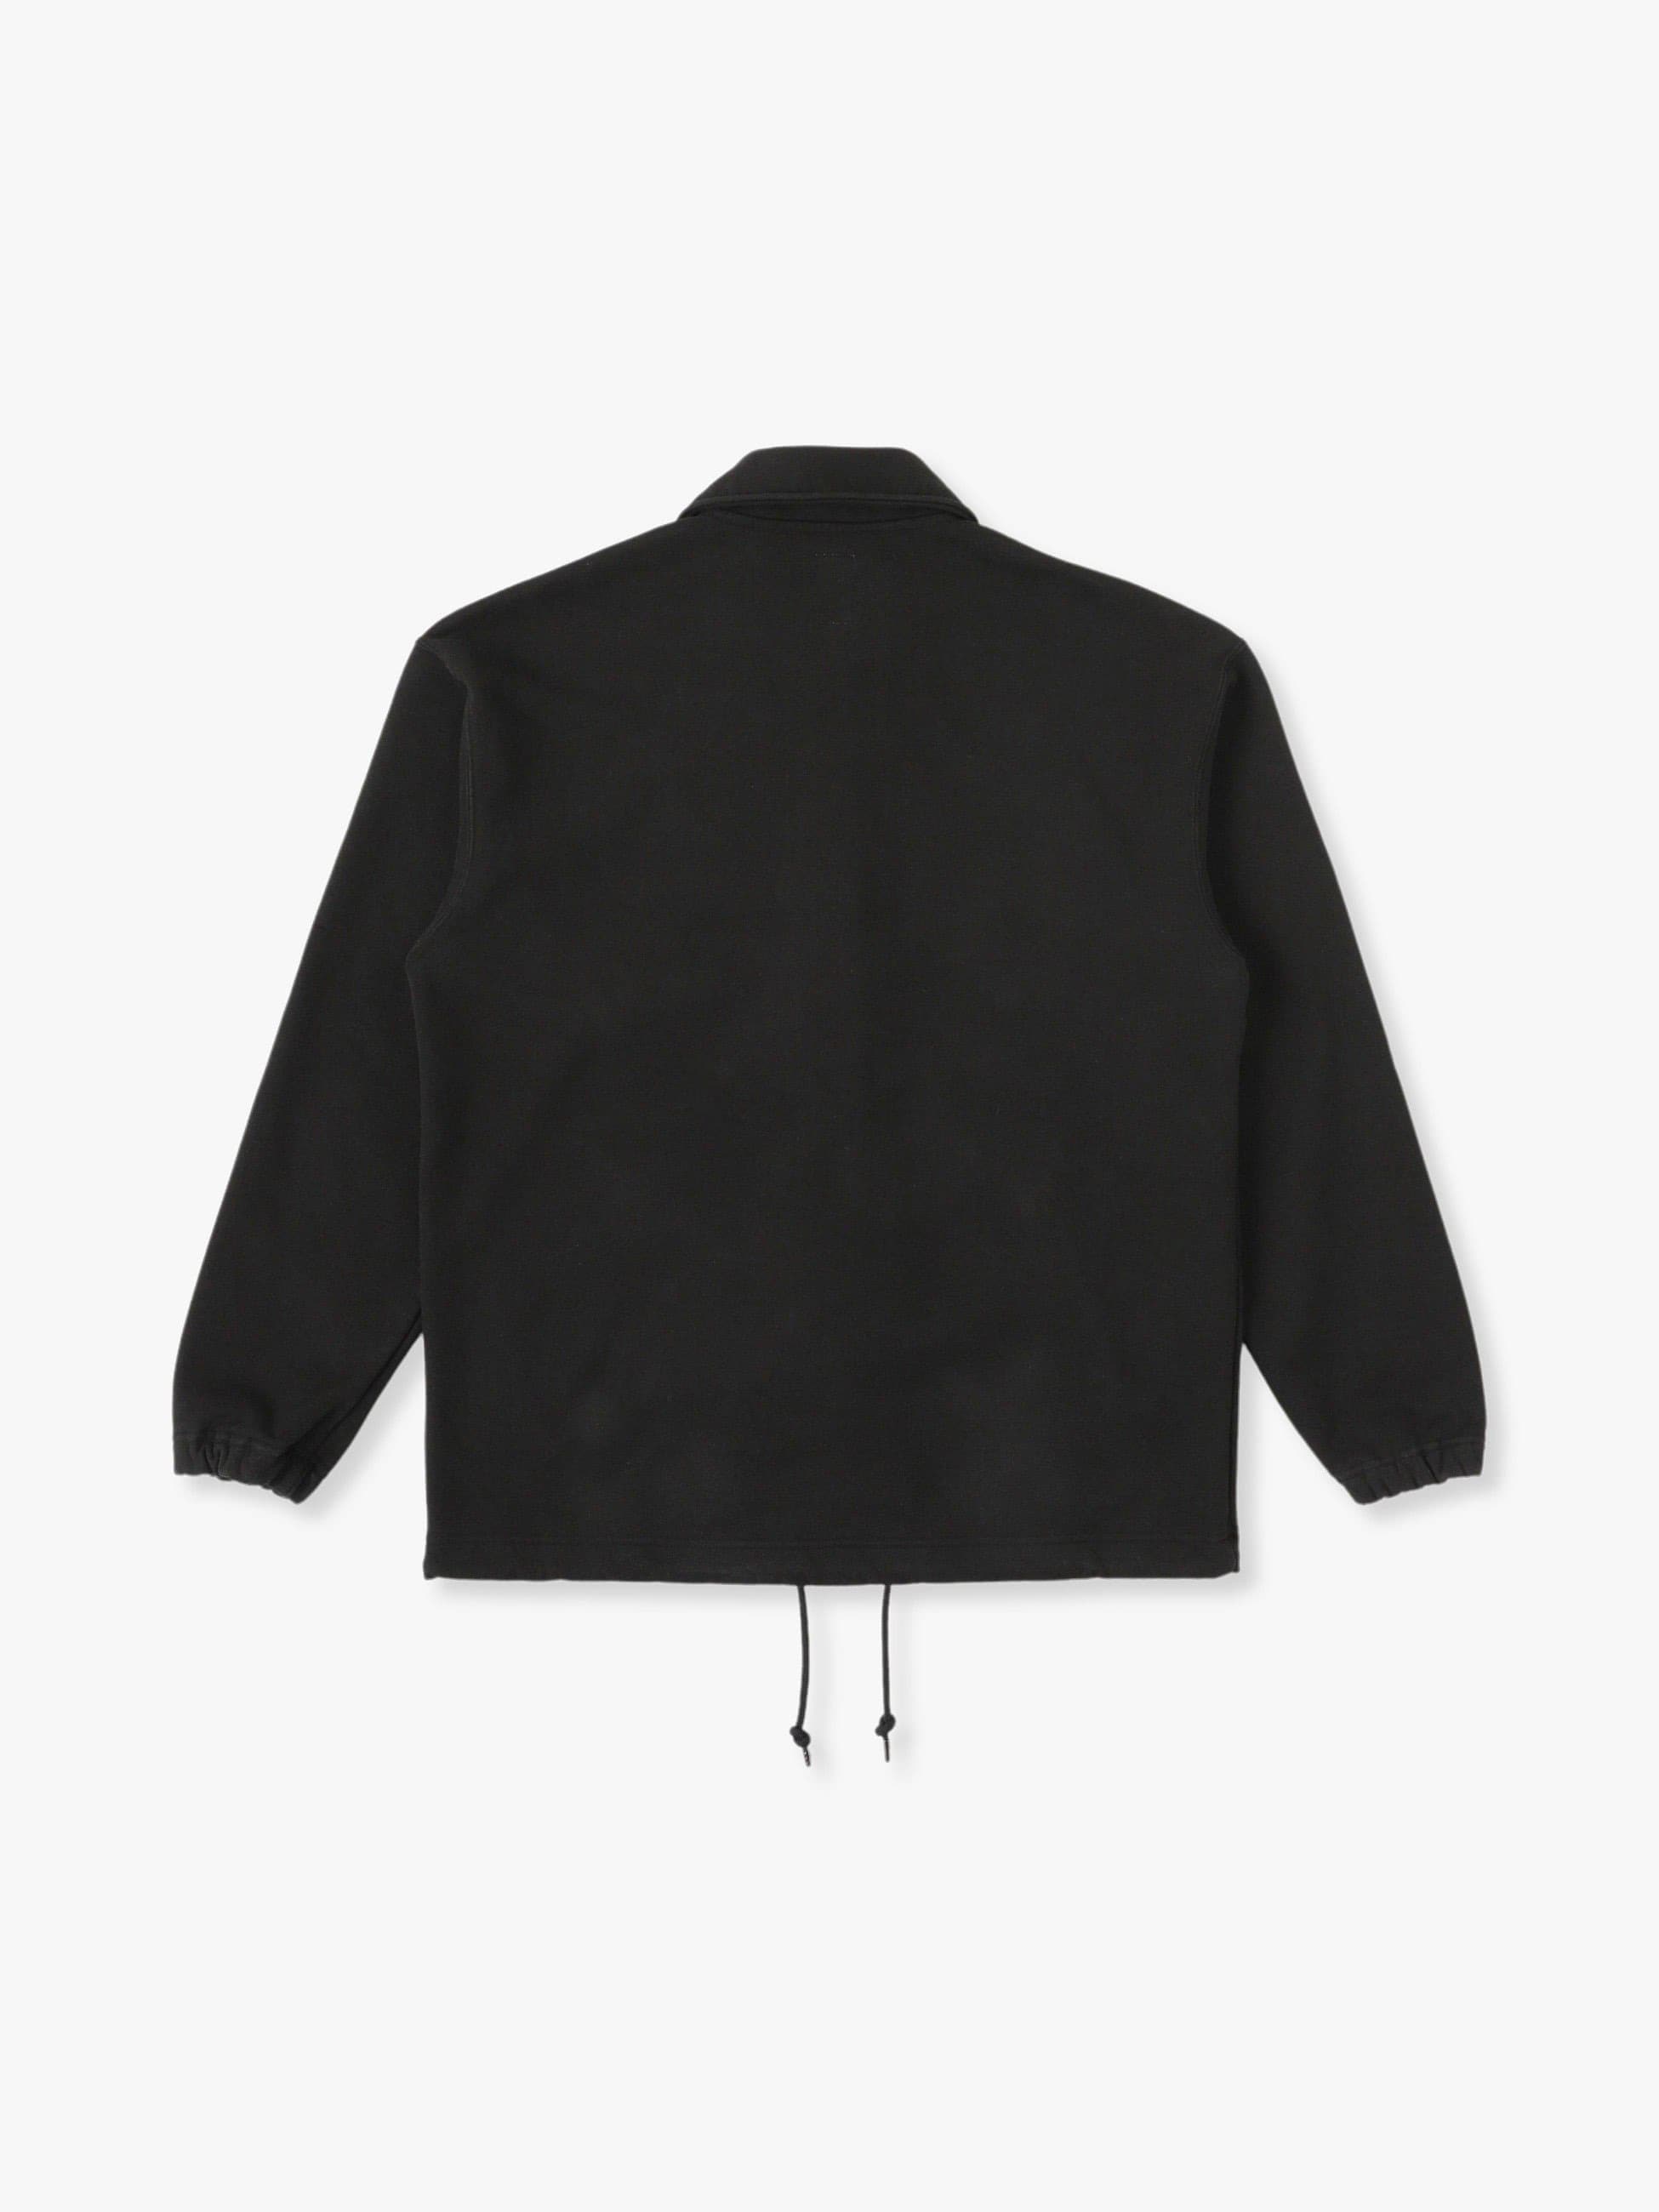 Nontwisted Yarn Bulky Sweat Coach Jacket｜Ron Herman(ロンハーマン